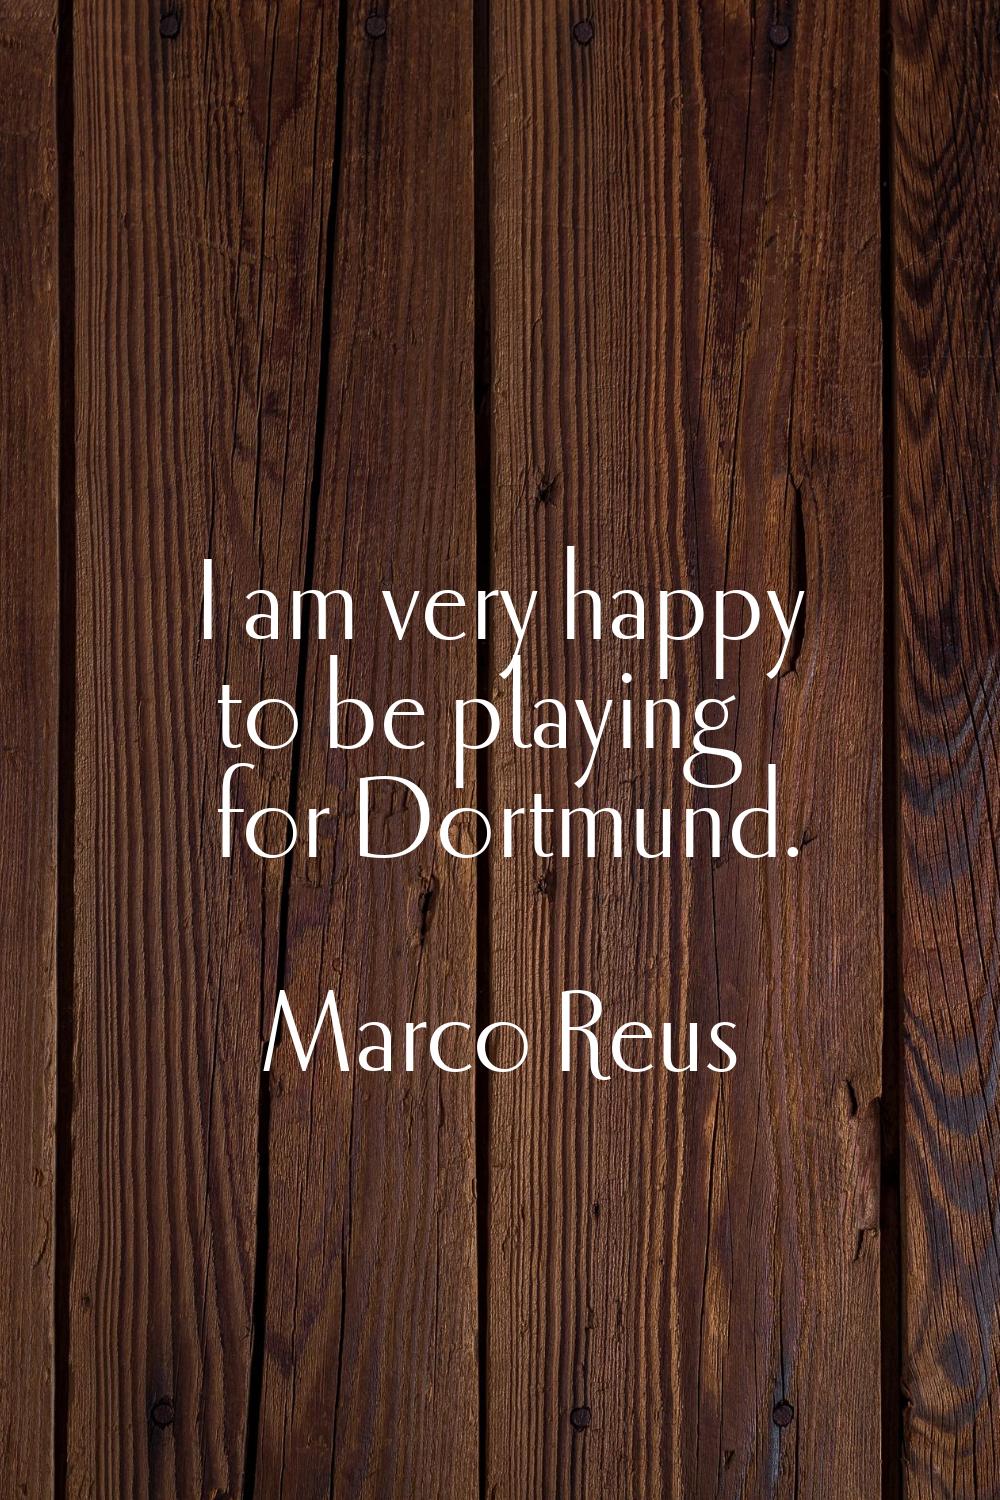 I am very happy to be playing for Dortmund.